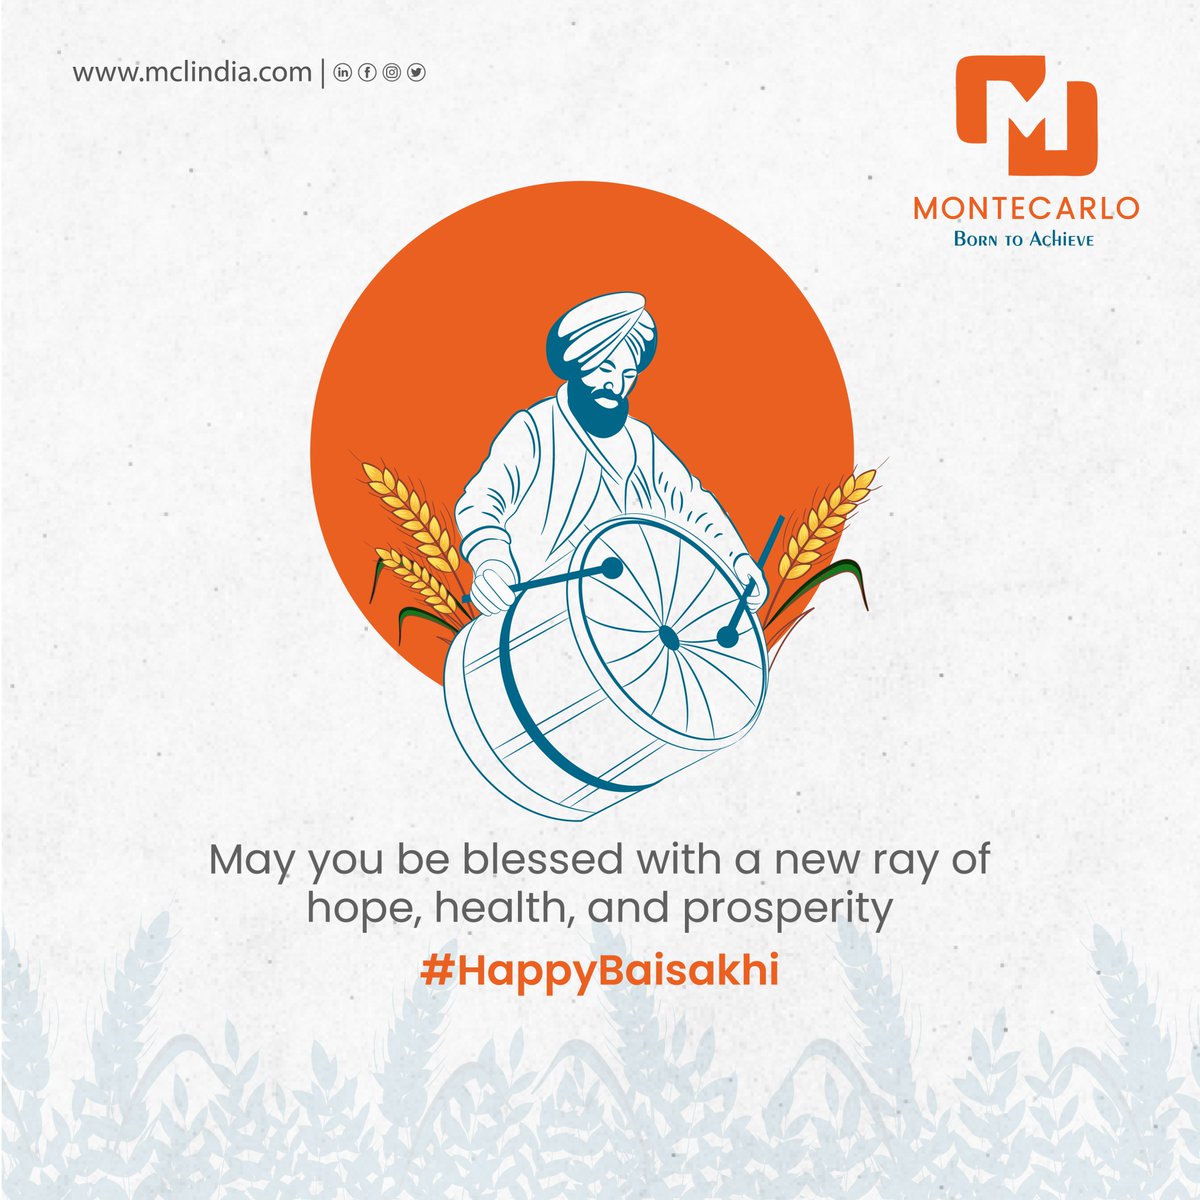 May the festival of Baisakhi bring new beginnings, bountiful harvests, and endless happiness! #Happybaisakhi 

#BaisakhiBlessings #BaisakhiCelebrations  #Baisakhi2023 #MontecarloLimited #construction #development #infrastructure #quality #trust #mcl #highways #railways